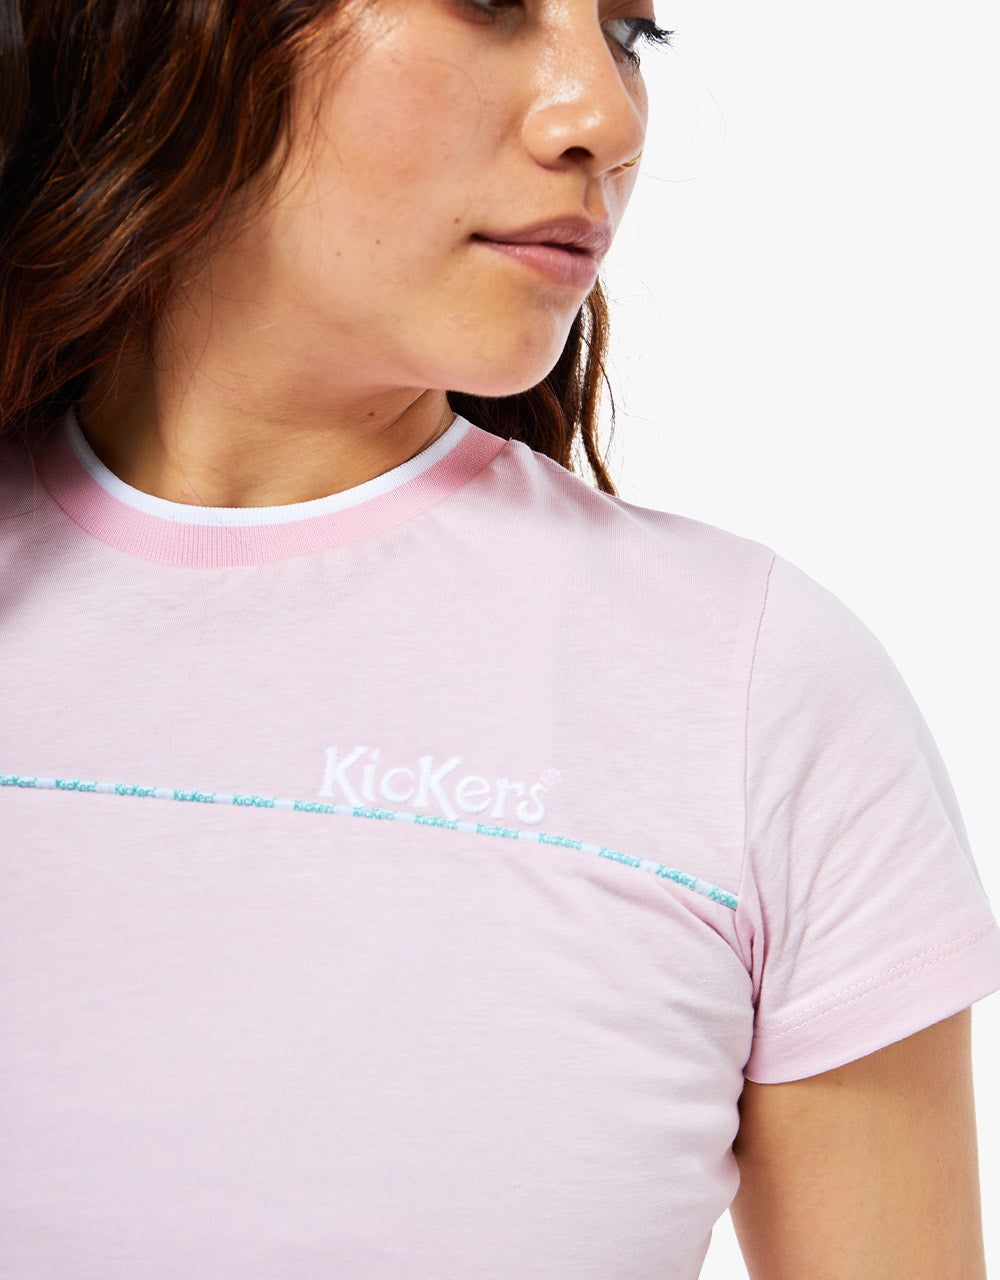 Kickers® Womens Cropped T-Shirt - Pink